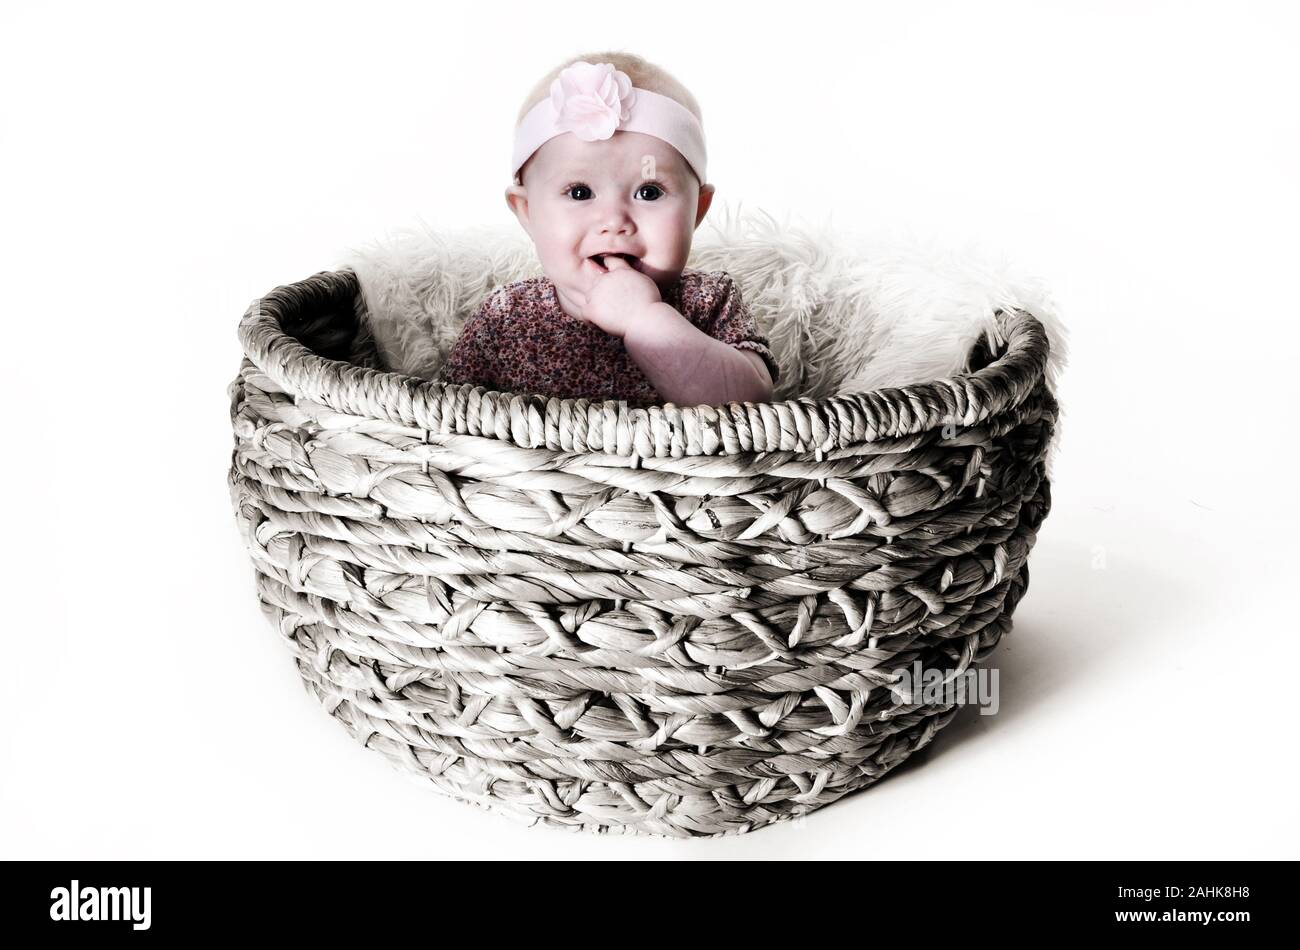 New Baby, parenting and child care Stock Photo